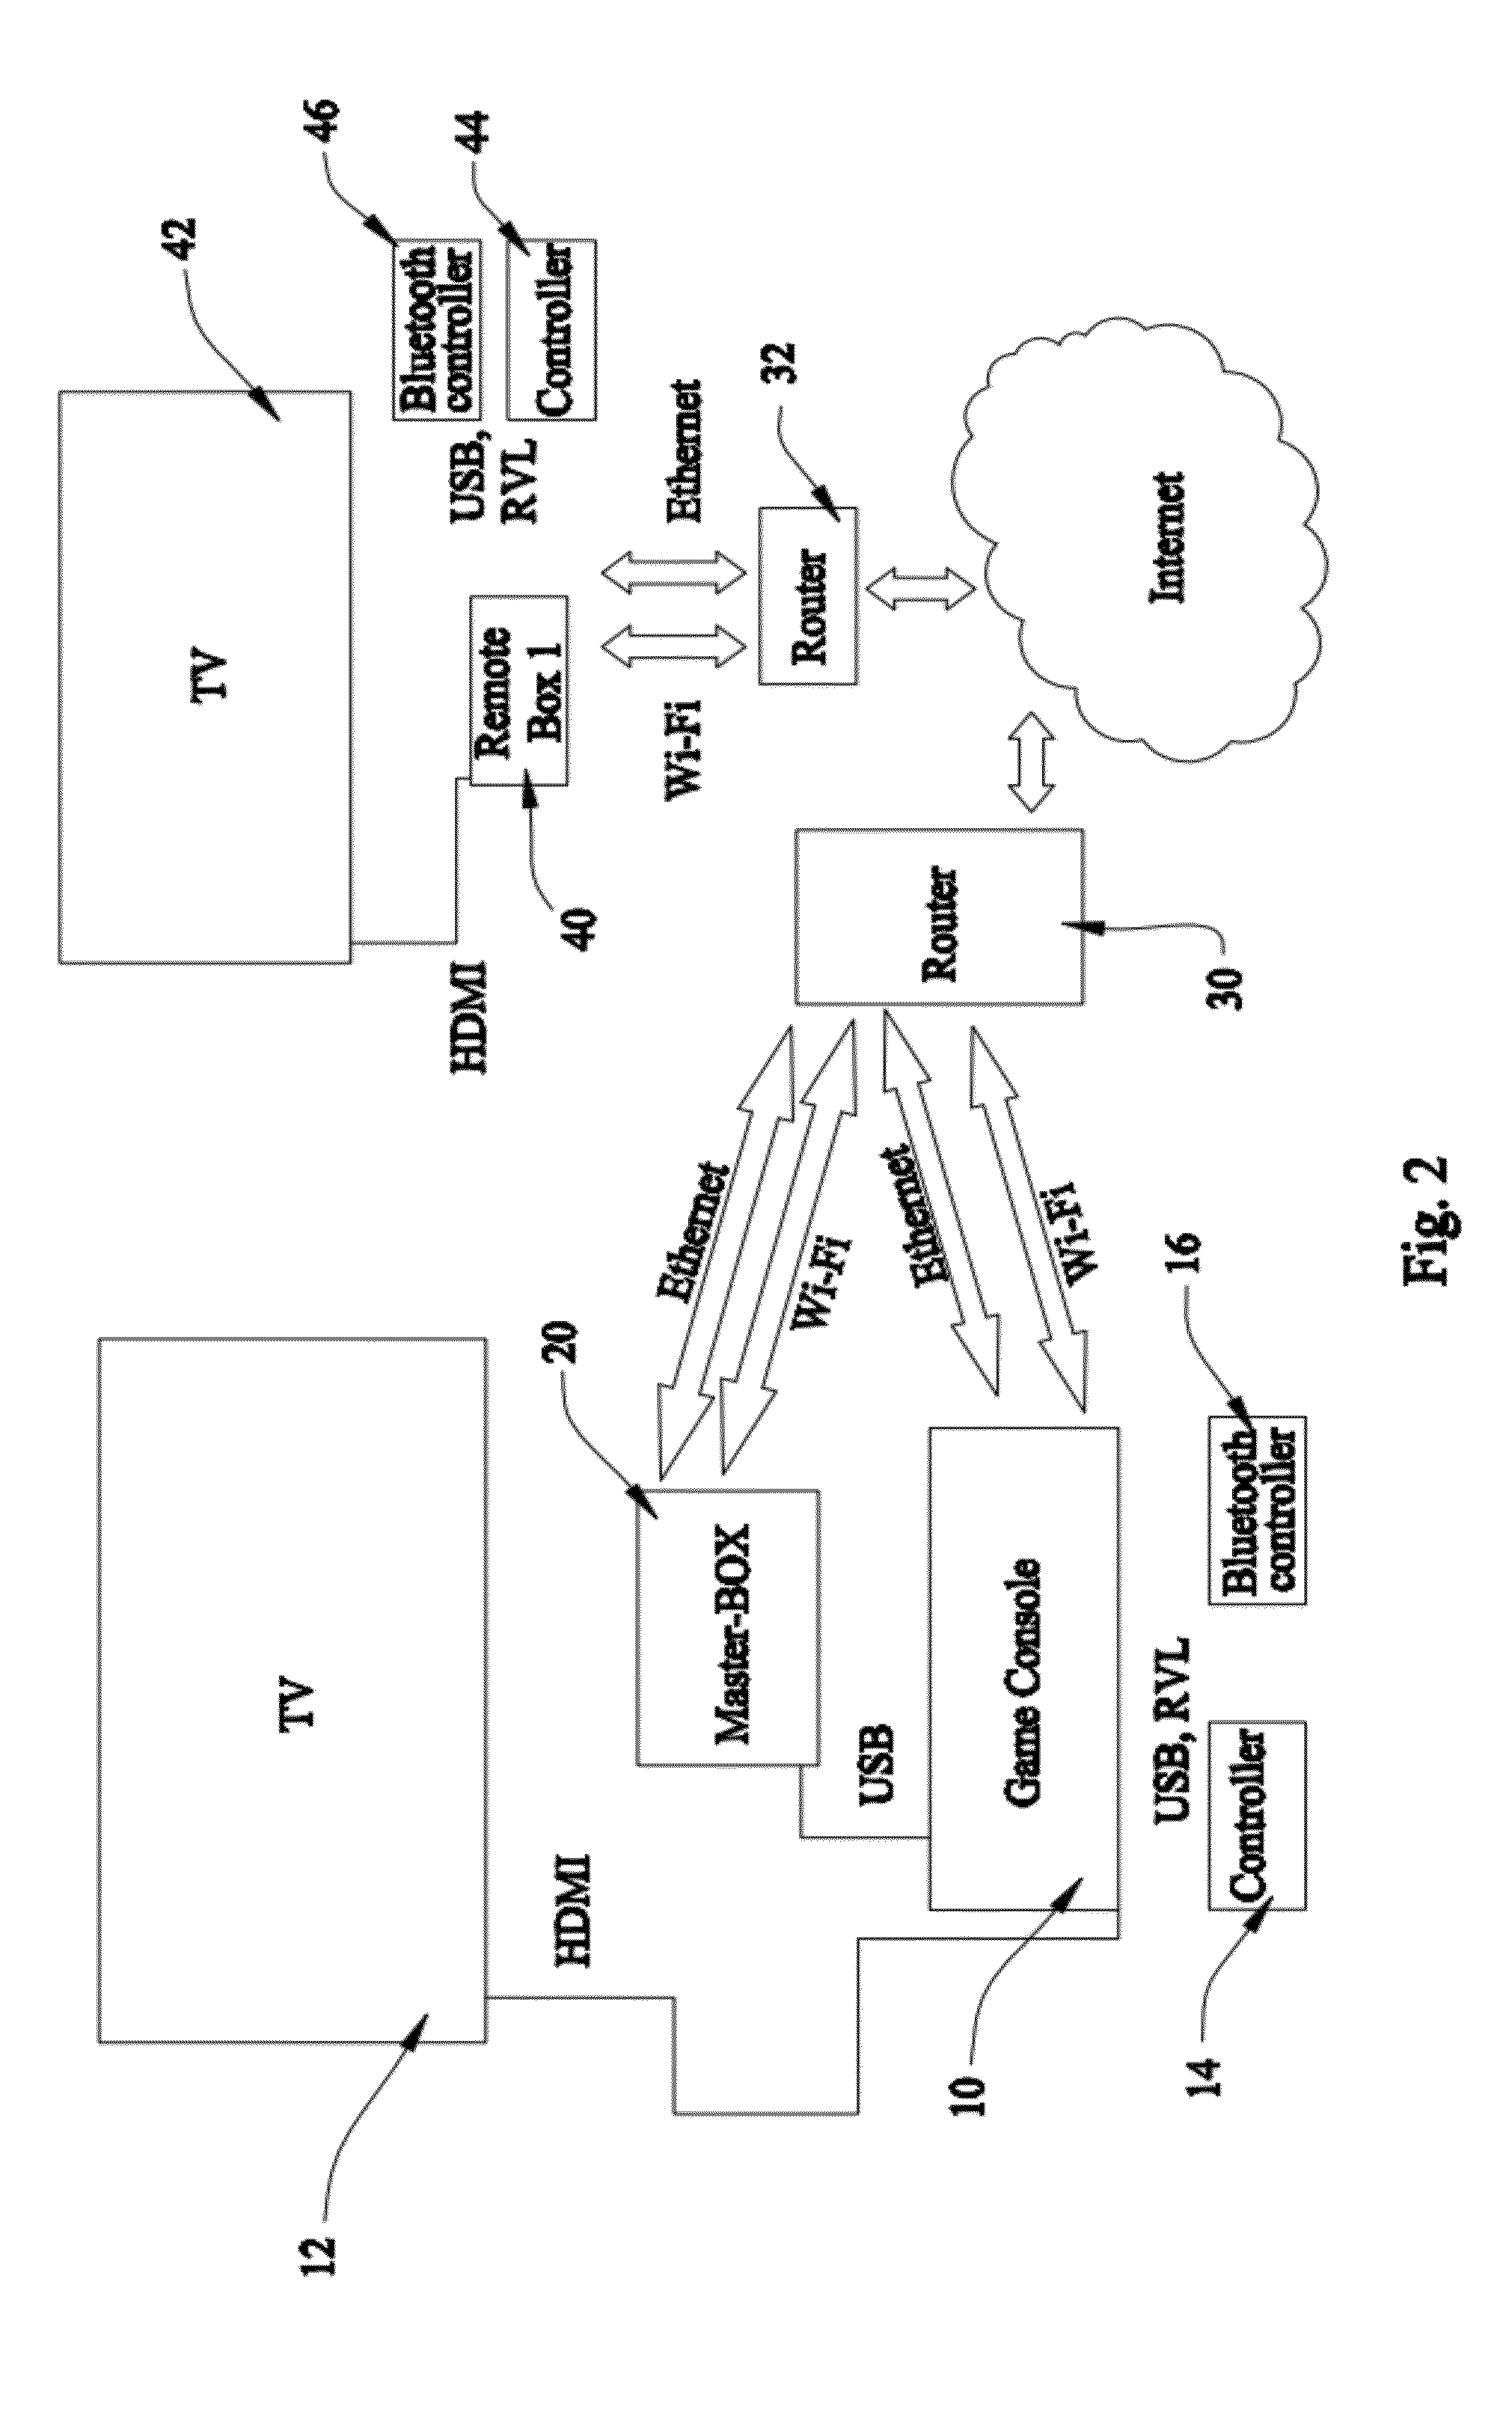 Distributed cloud gaming method and system where interactivity and resources are securely shared among multiple users and networks